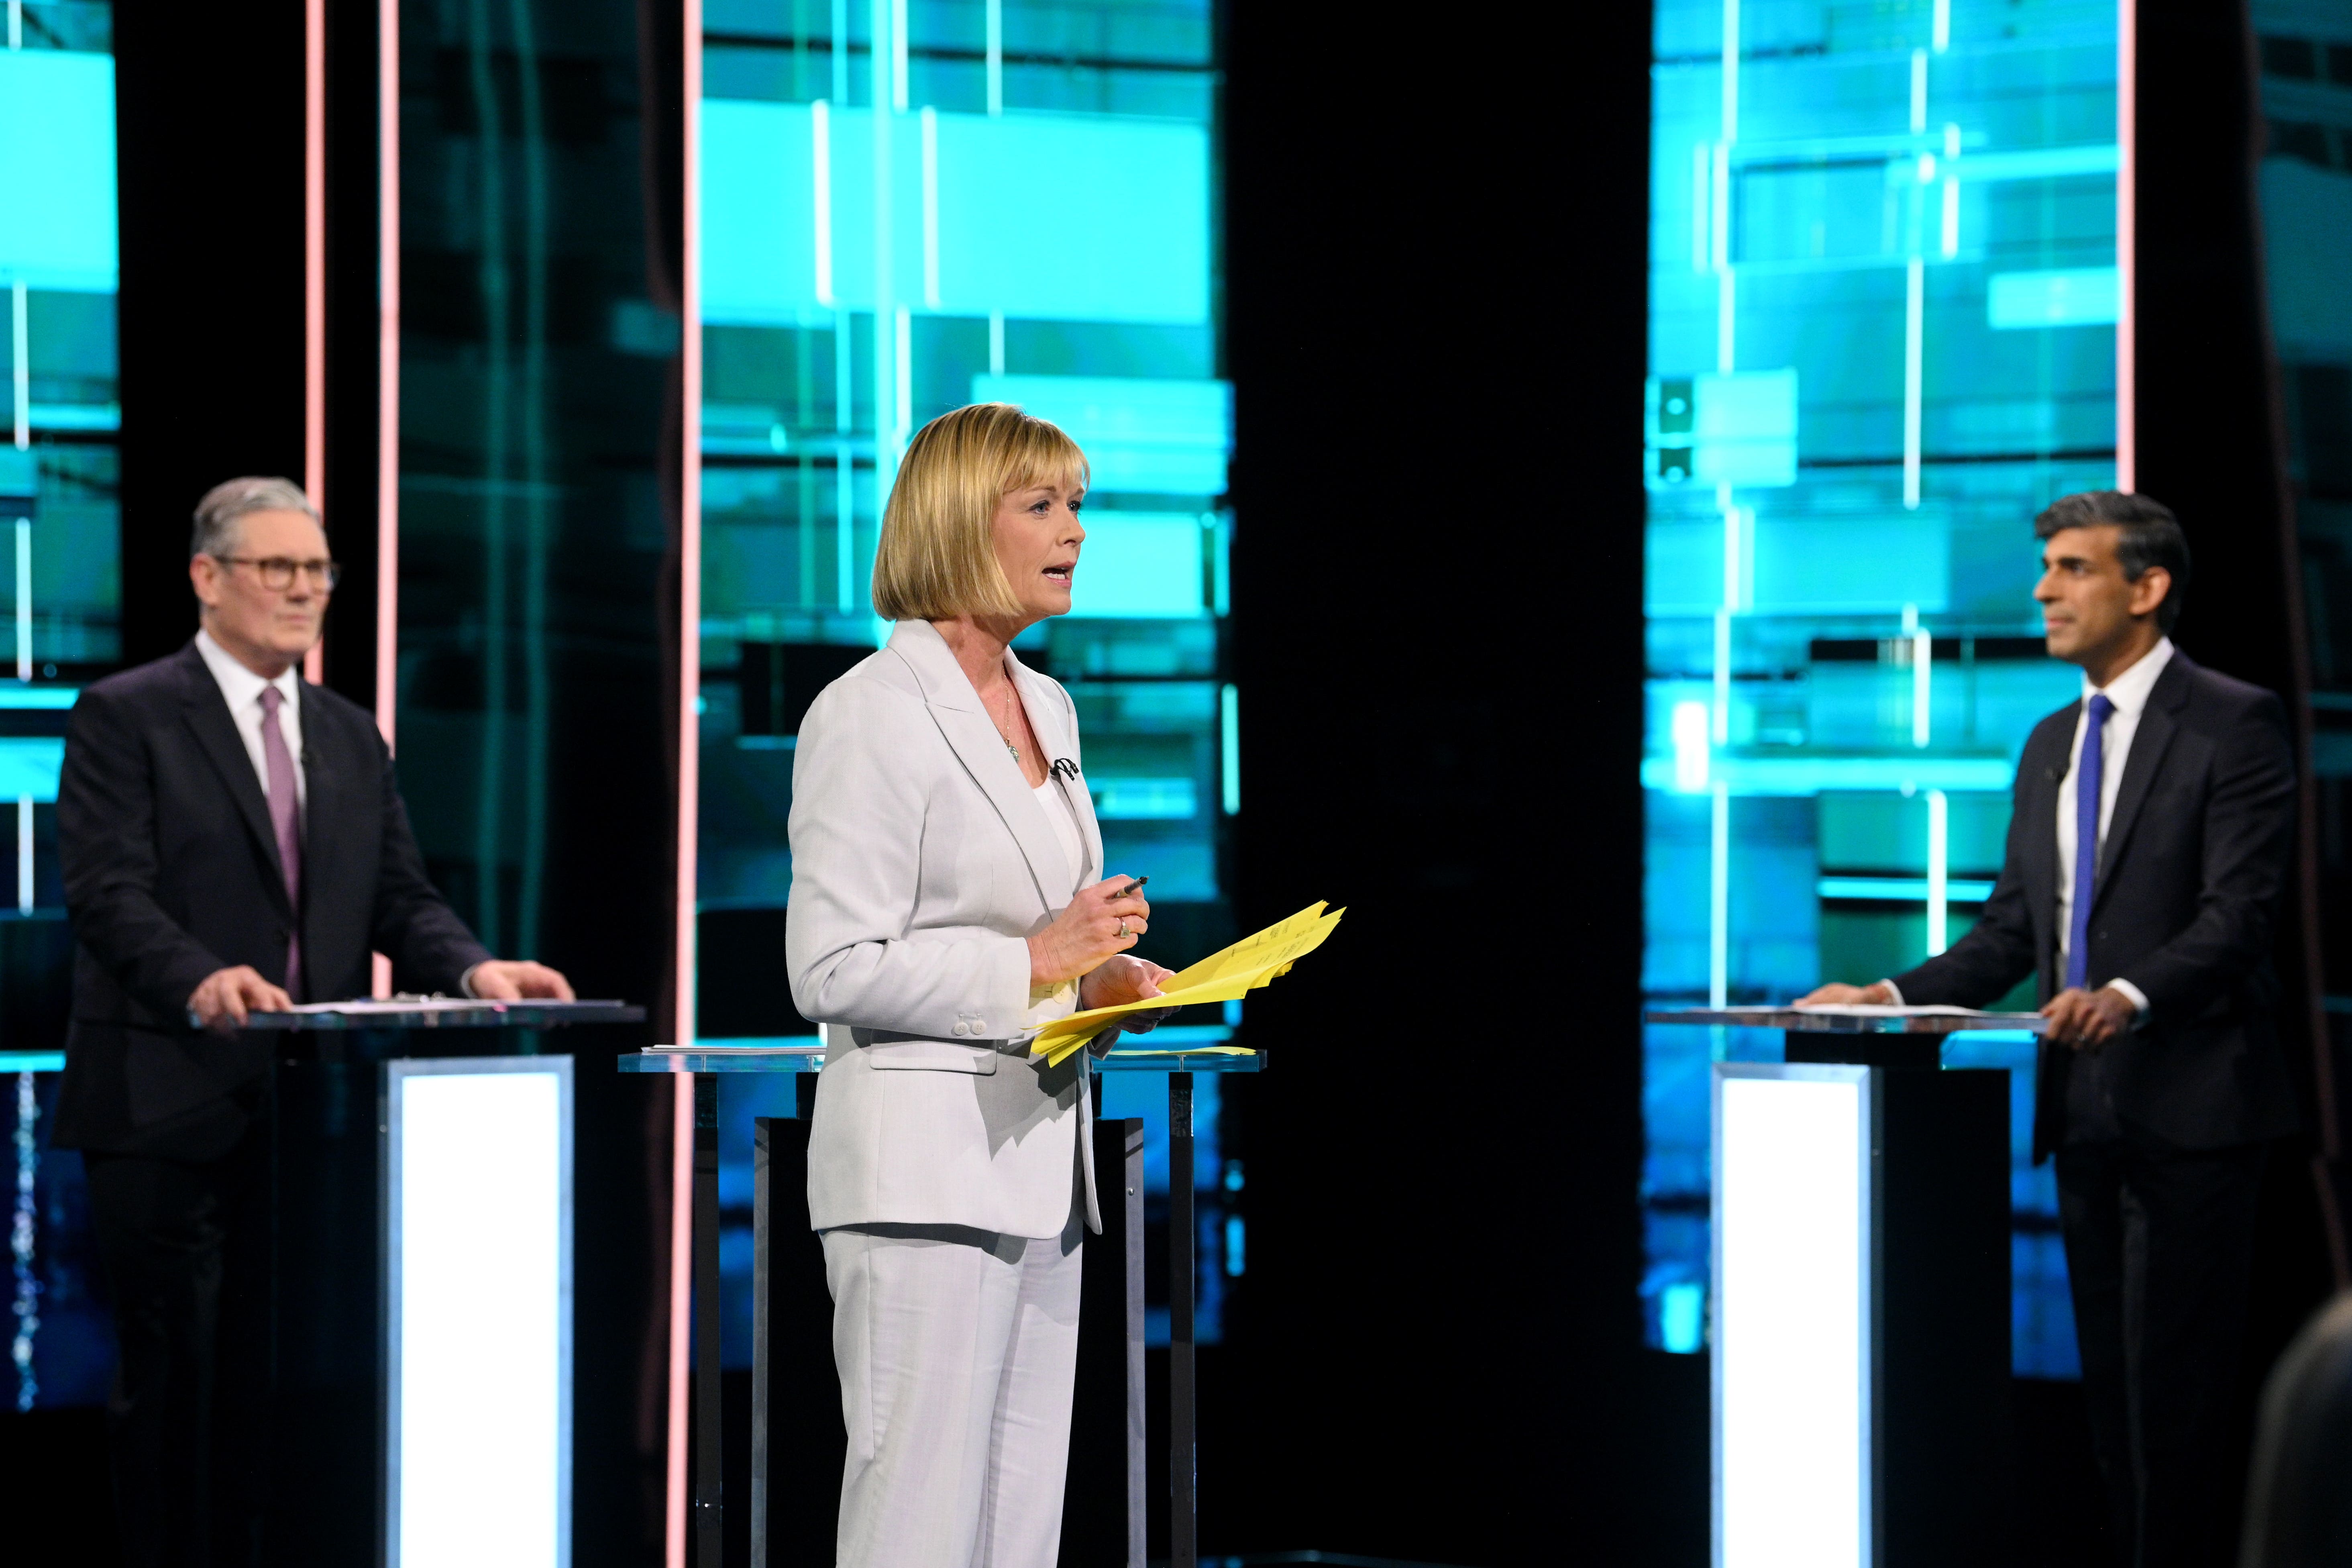 Julie Etchingham chairs the debate on Tuesday night